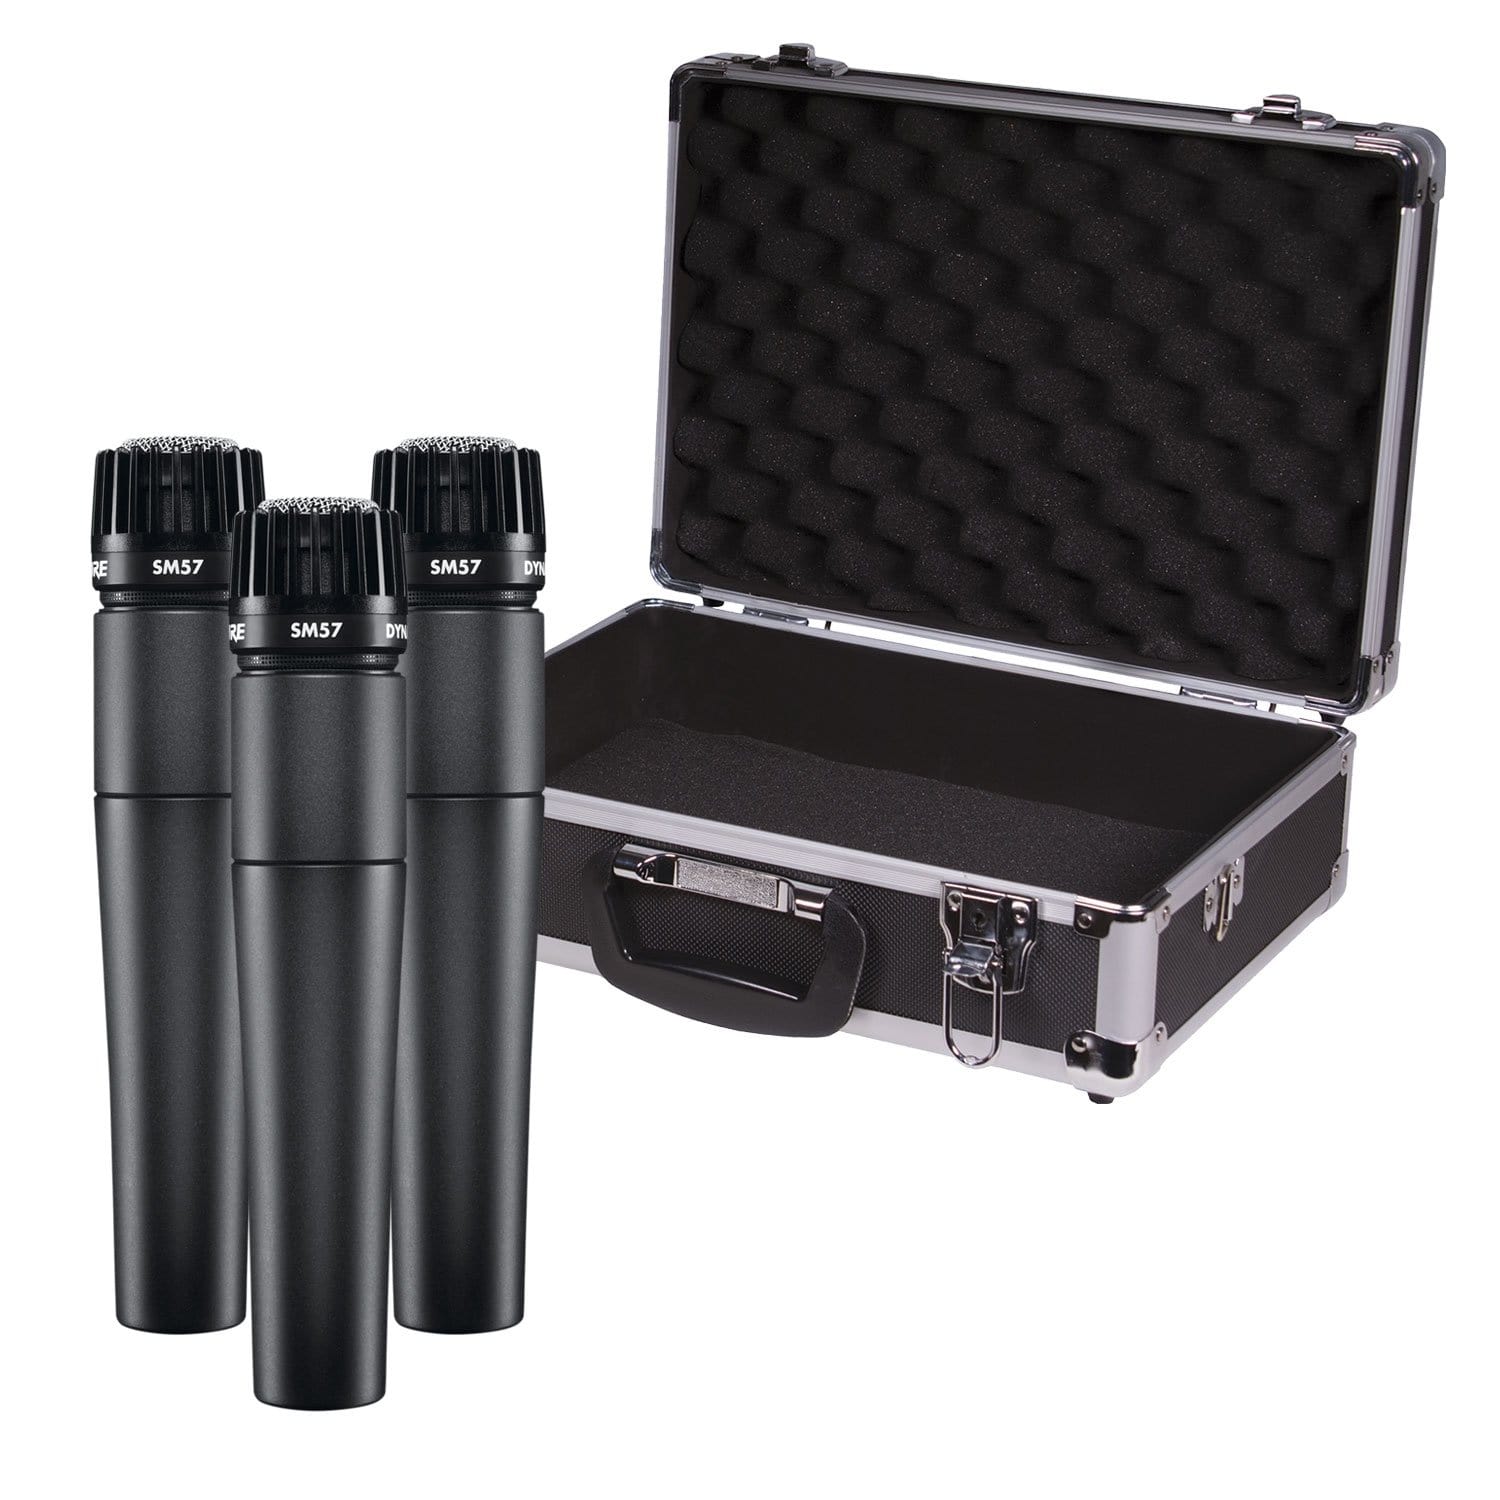 Shure SM57 Instrument Mic 3-Pack with Carrying Case